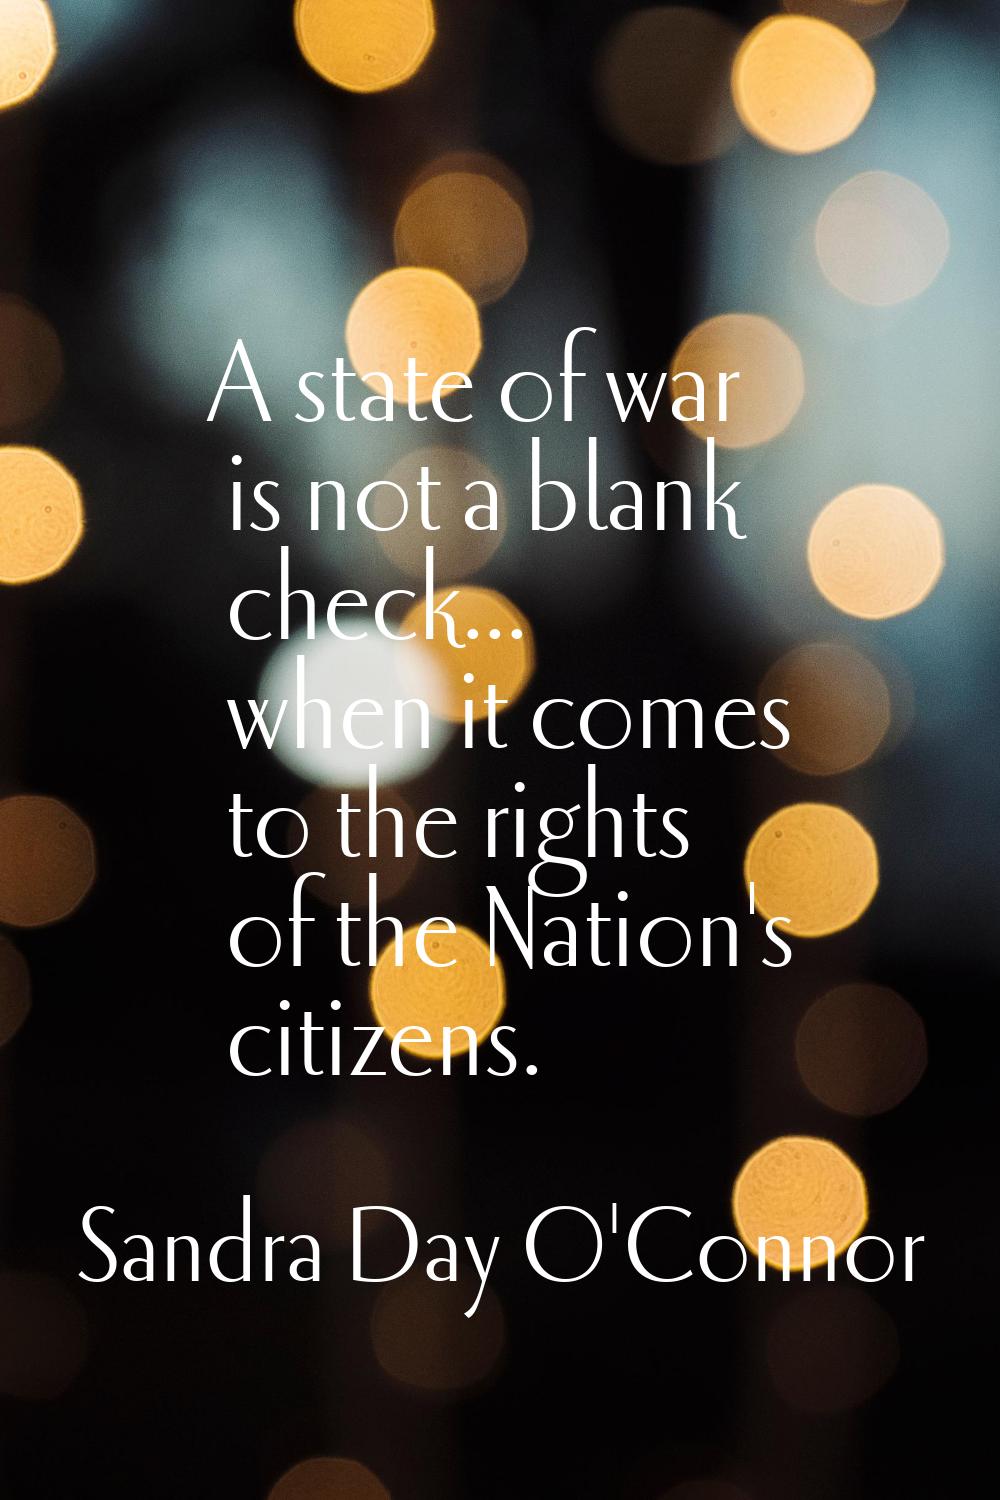 A state of war is not a blank check... when it comes to the rights of the Nation's citizens.